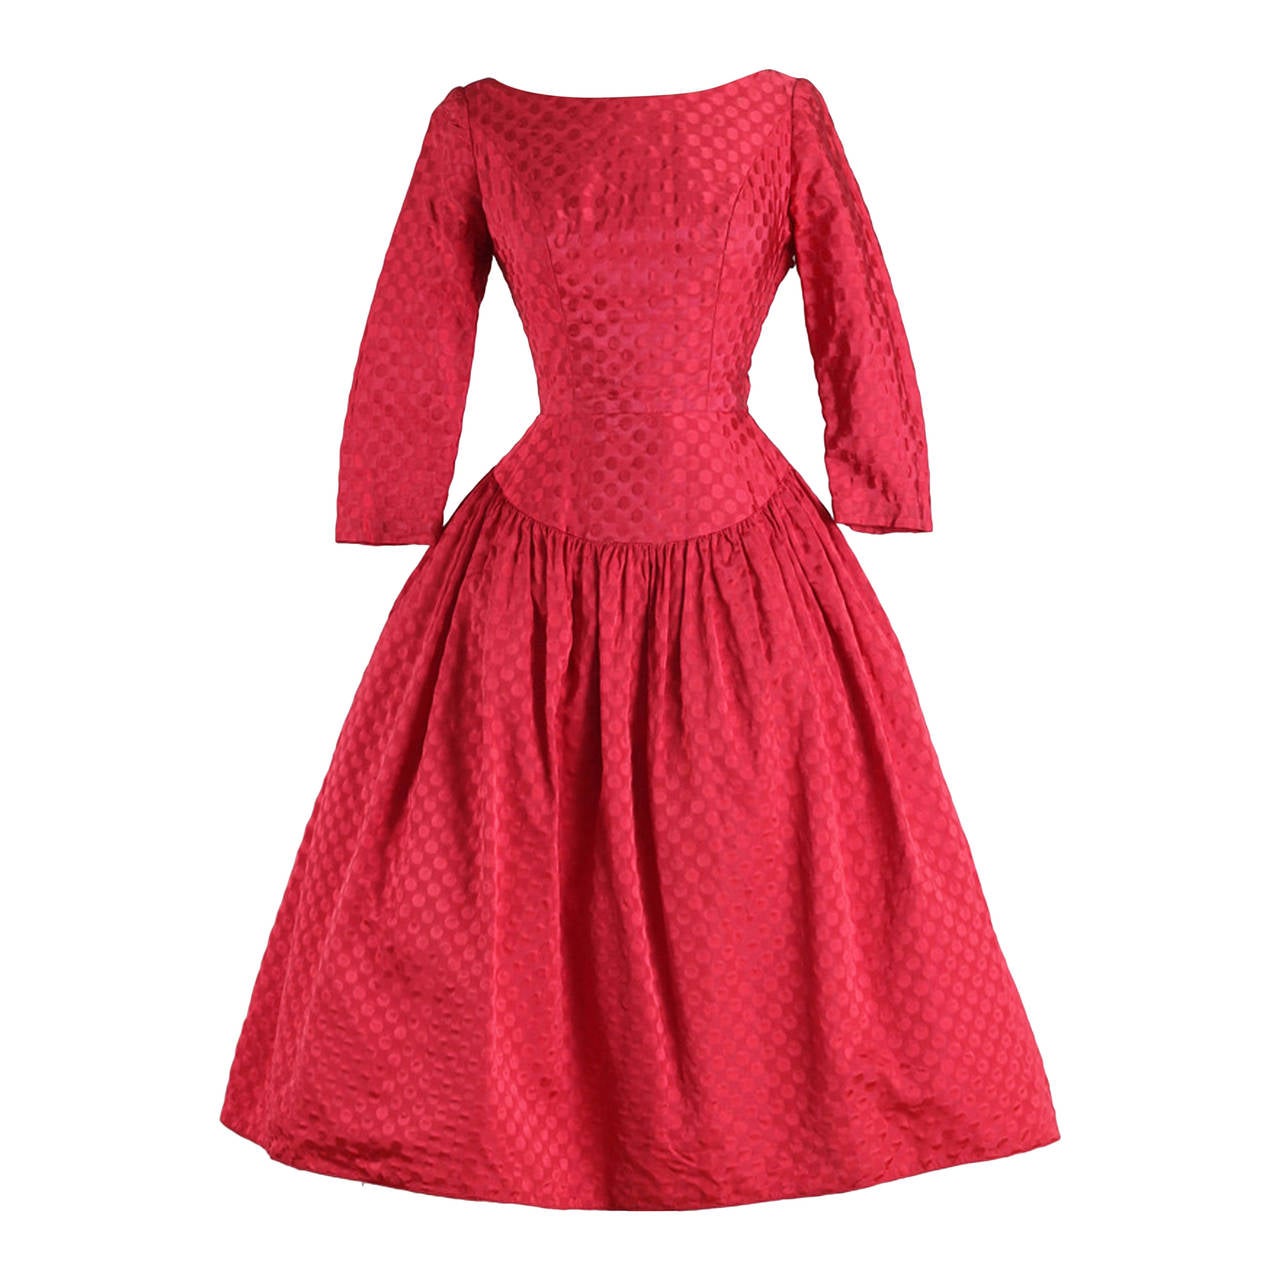 Vintage 1950s Red Dot Taffeta Party Dress For Sale